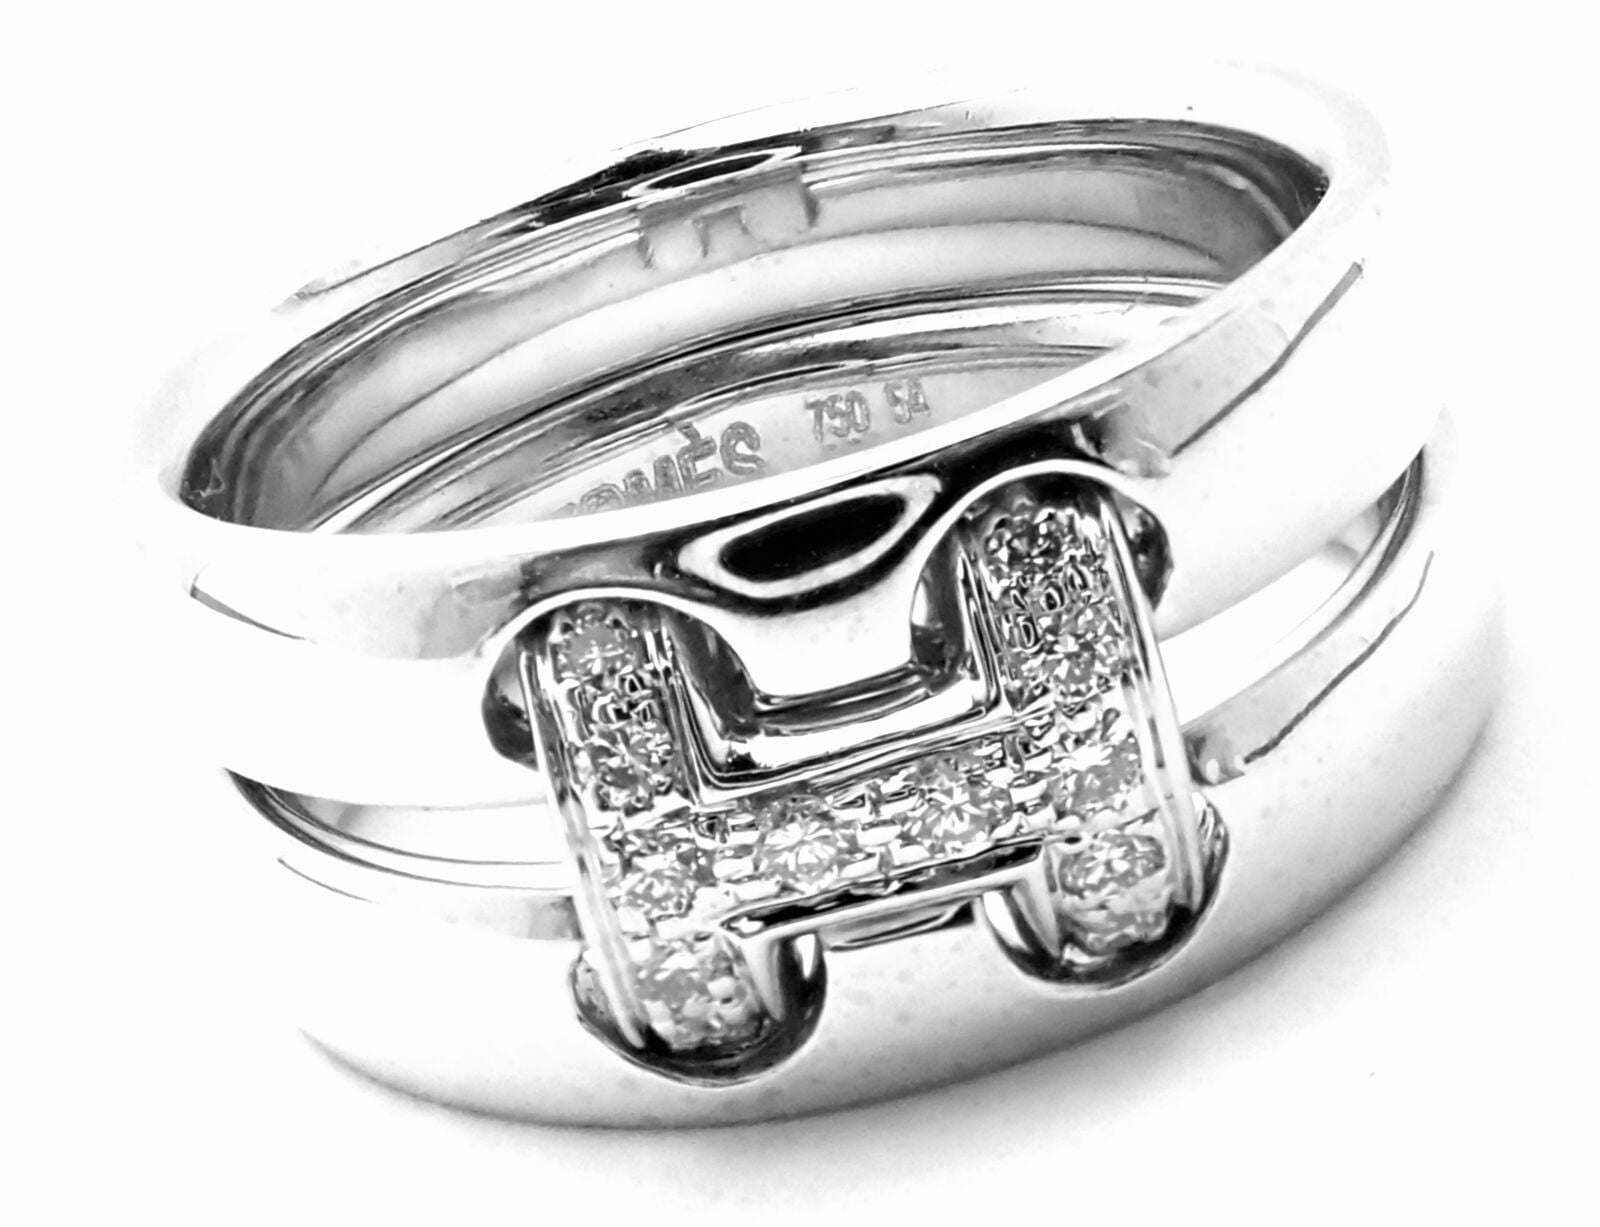 Hermes Jewelry & Watches:Fine Jewelry:Rings Authentic! Hermes 18k White Gold Diamond H Double Band Flex Band Ring